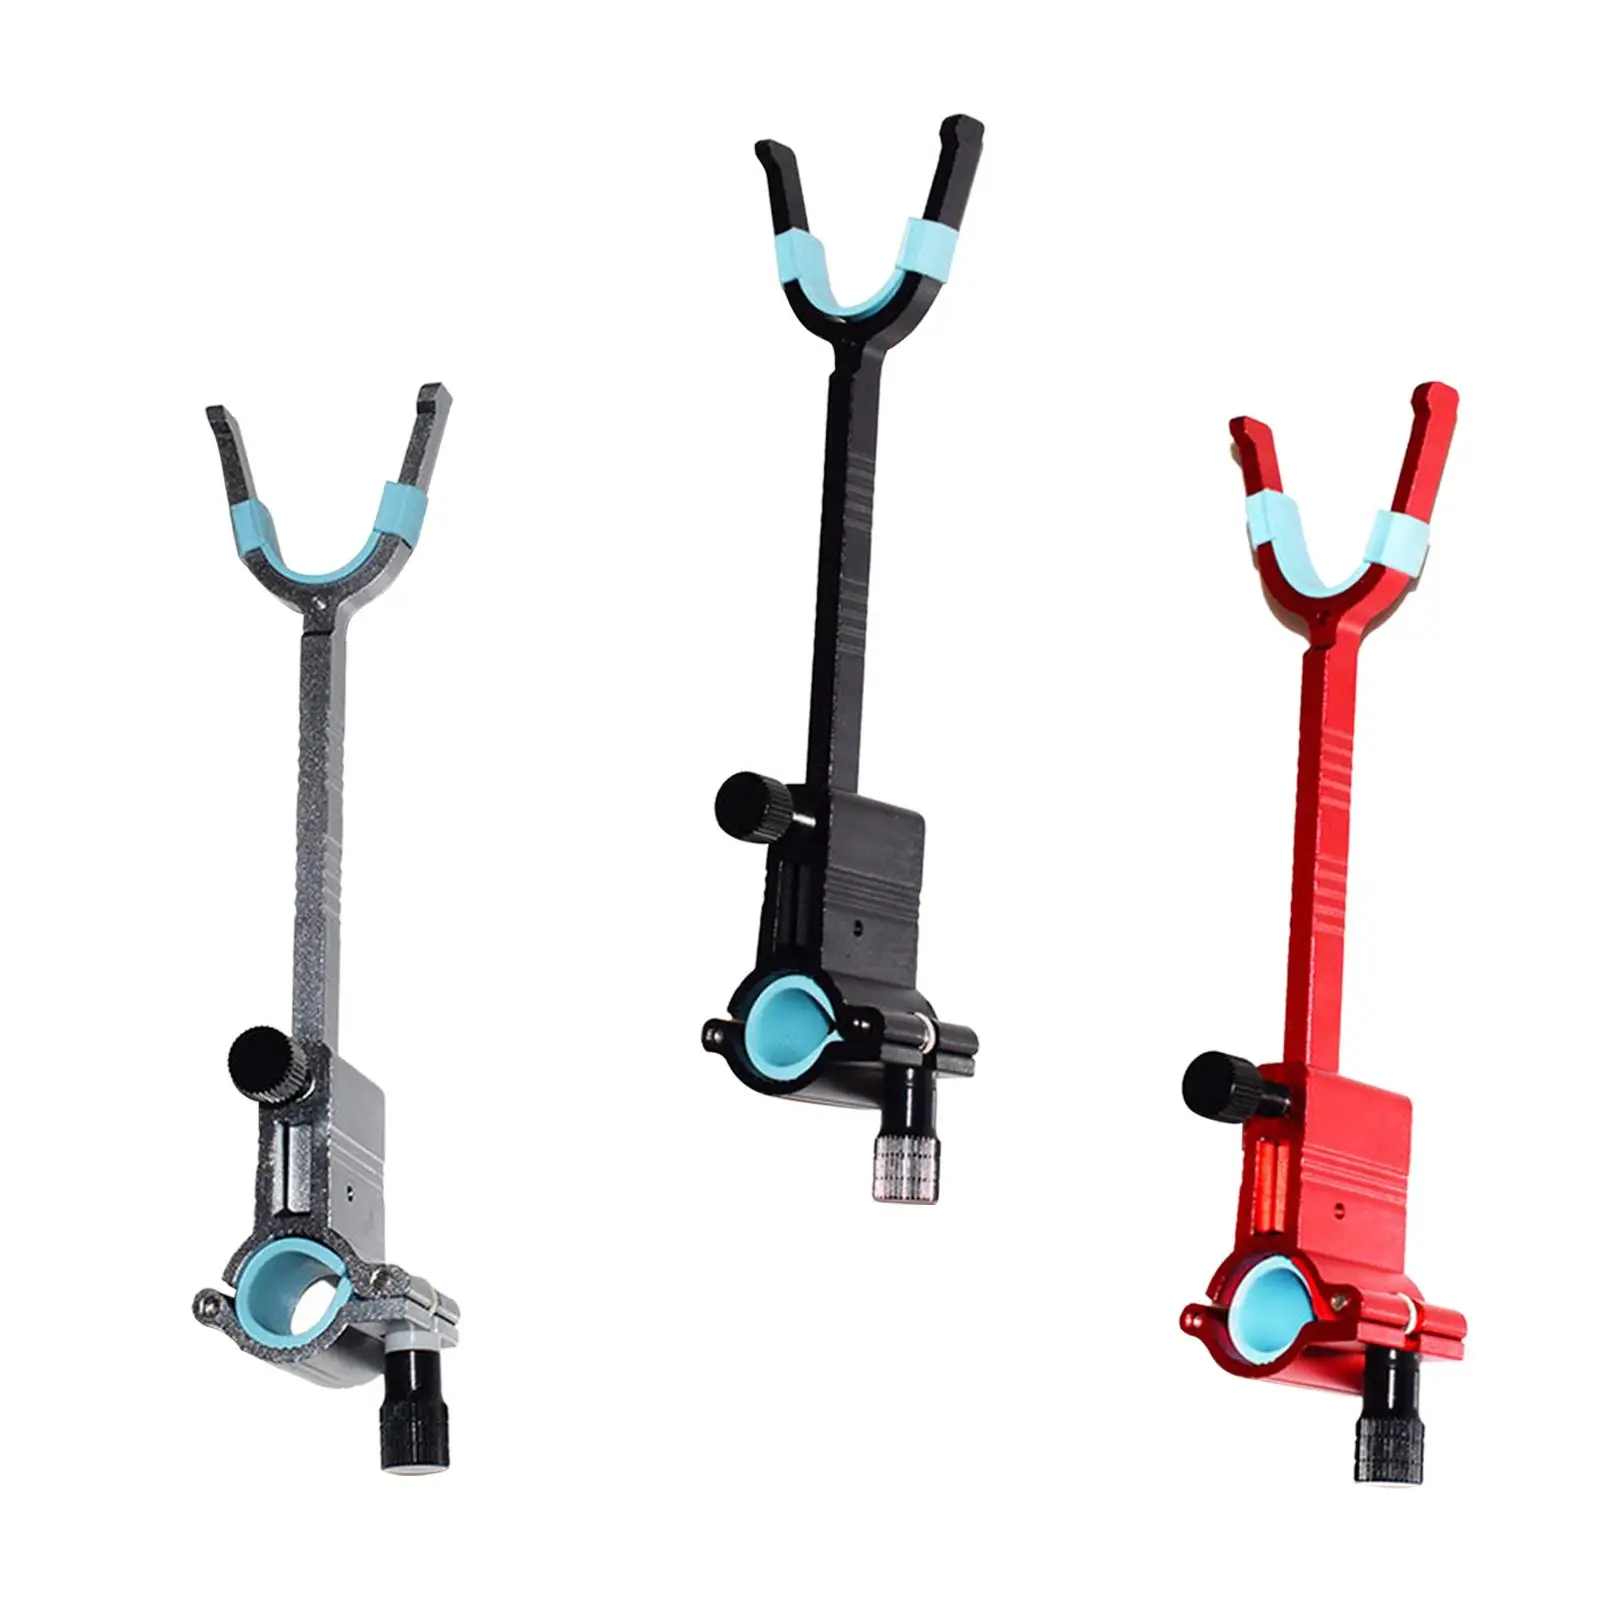 Rod Holders for Bank Fishing Extending Rod Rest Portable Fishing Rod Bracket Fishing Pole Holder for Rivers Fishing Gear